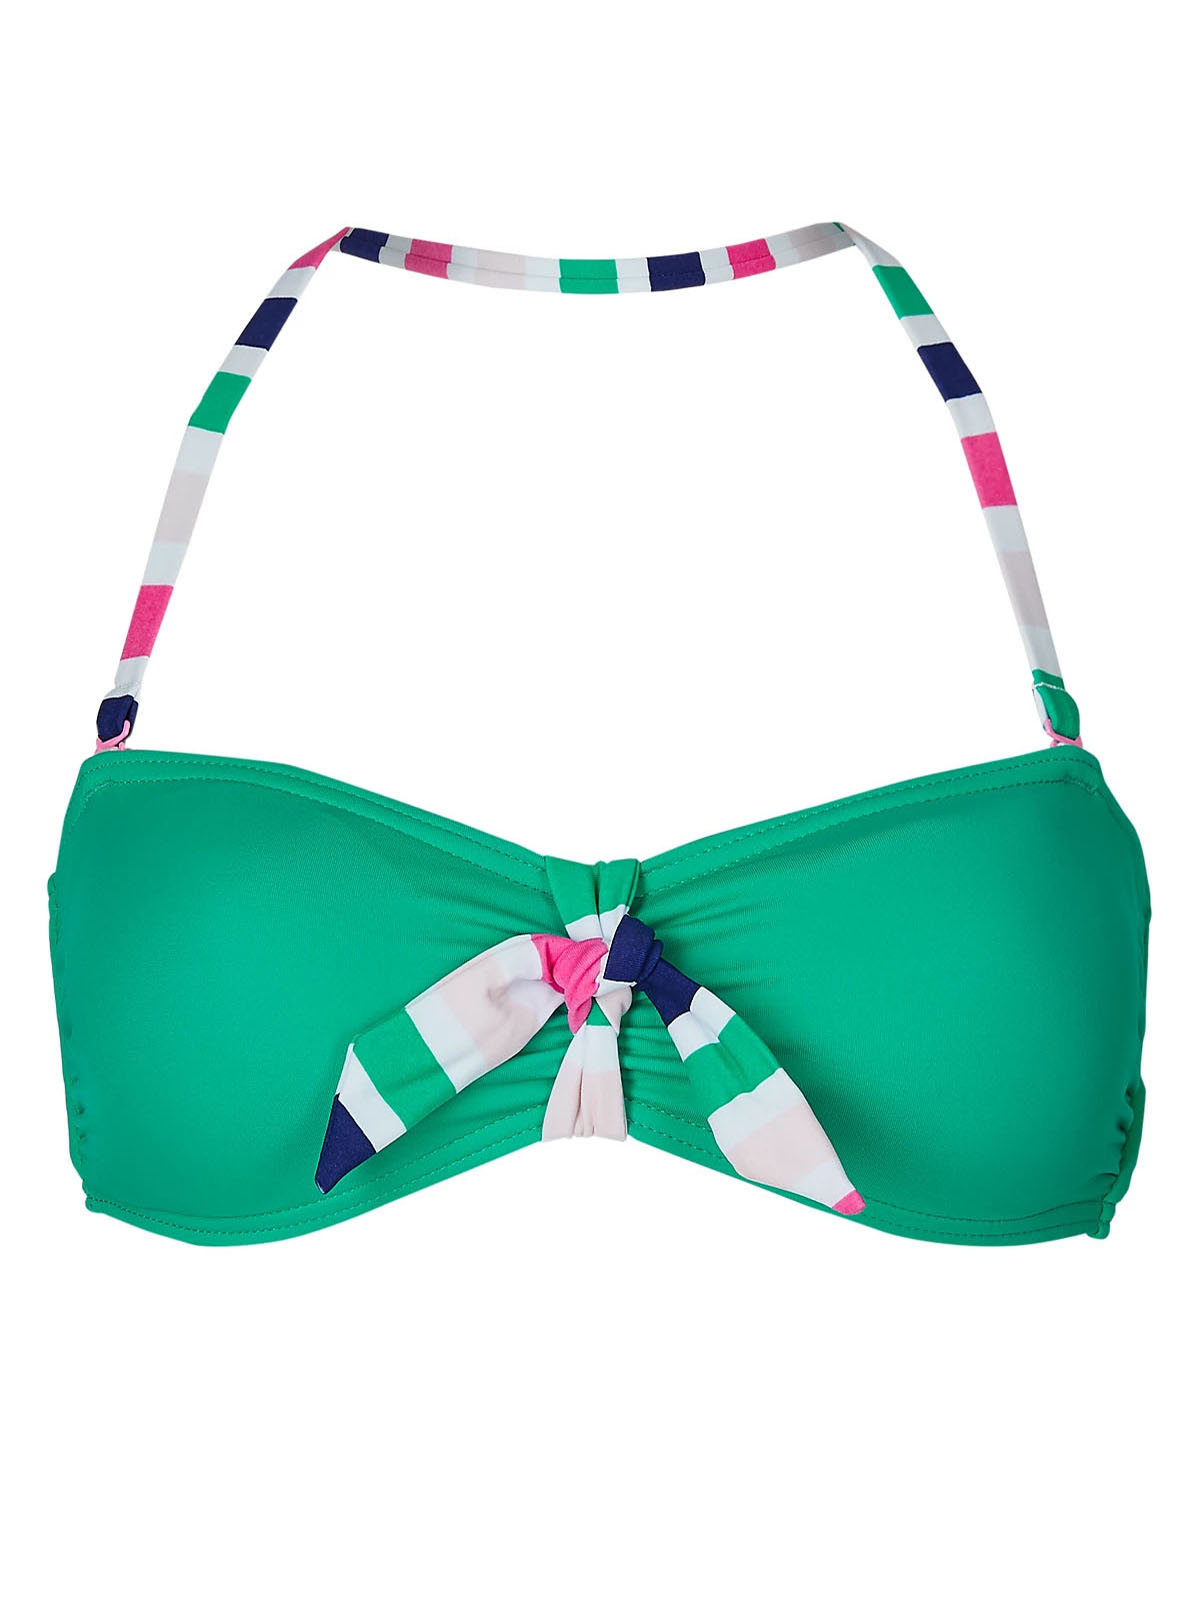 Marks and Spencer - - M&5 GREEN Padded Bandeau Bikini Top - Size 6 to 18